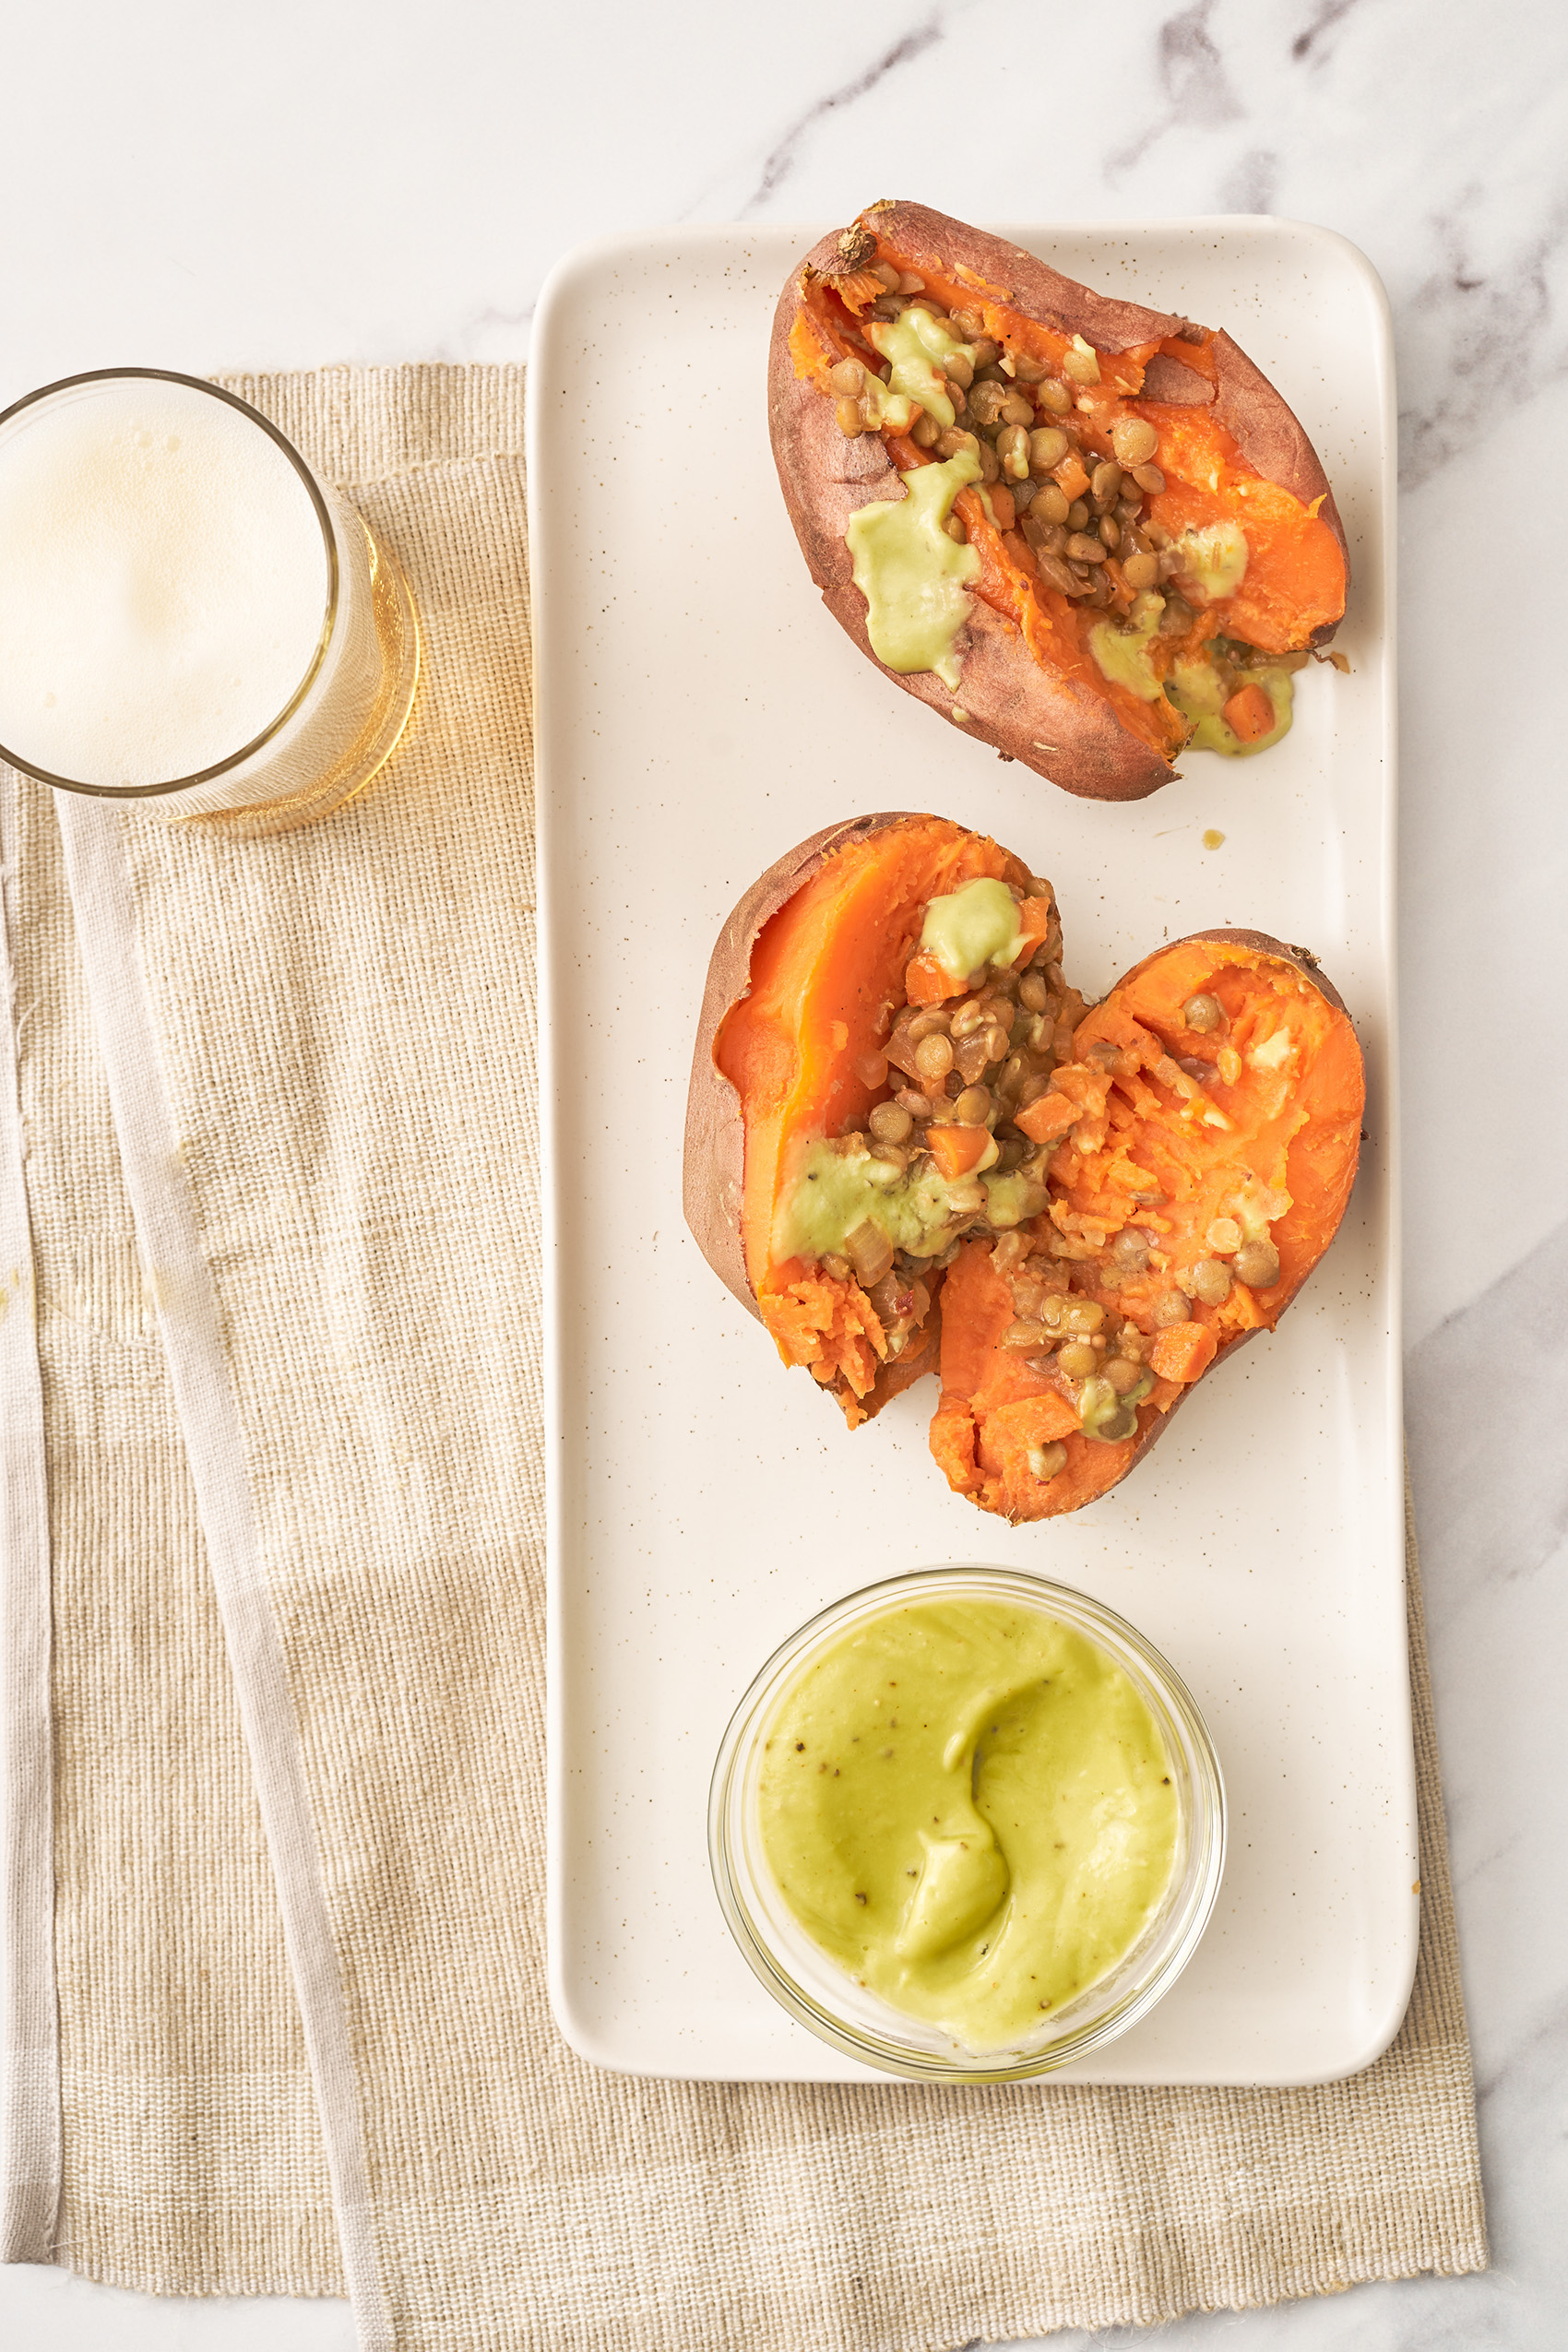 two sweet potatoes sliced in half and topped with barbecue lentils and a creamy avocado sauce